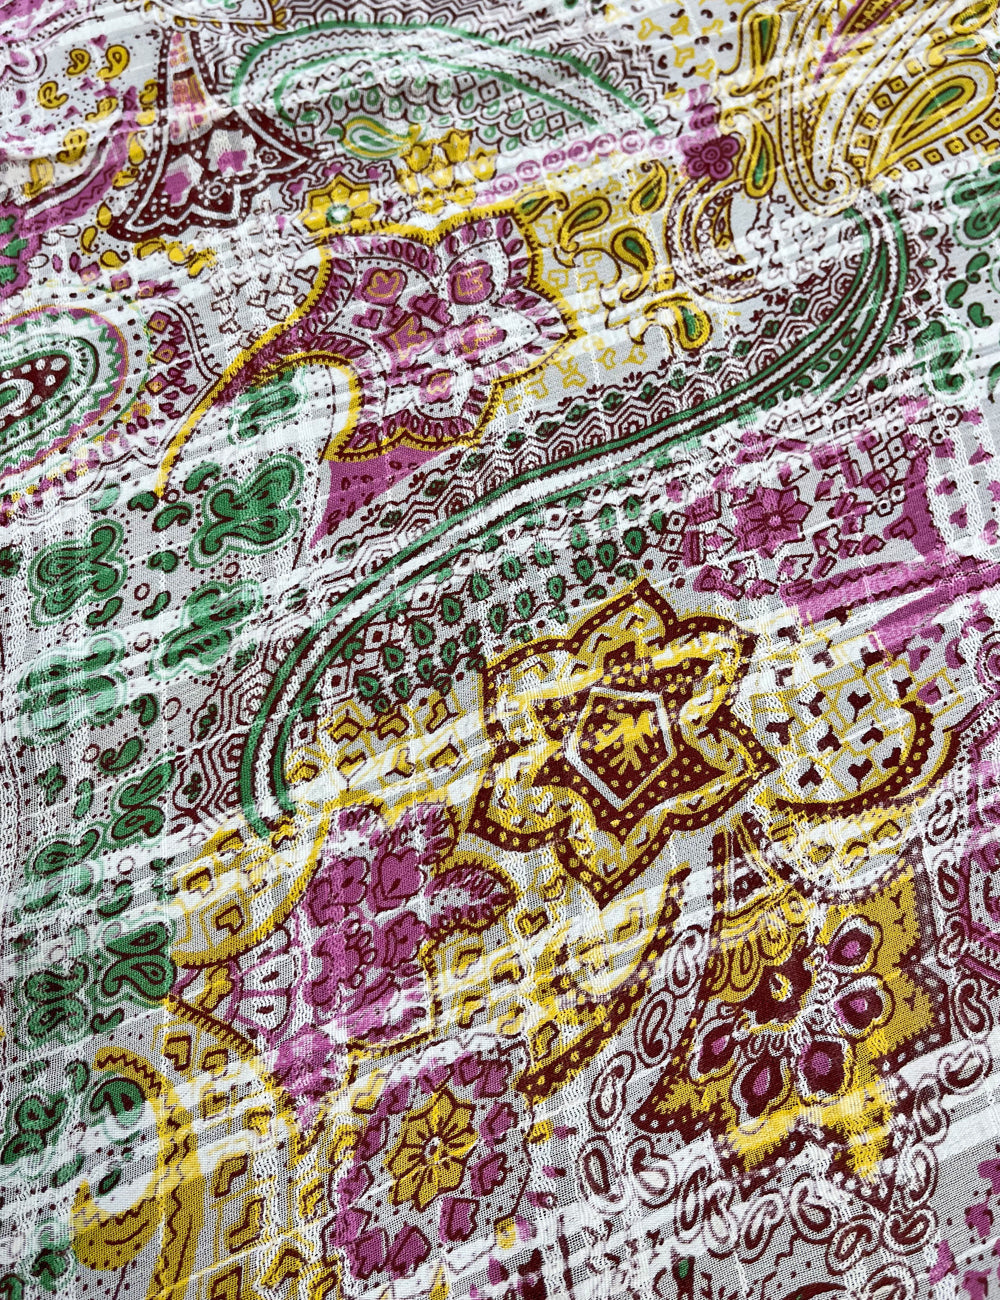 White & Colorful Paisley Print Sheer Textured Georgette Fabric - 3 yds